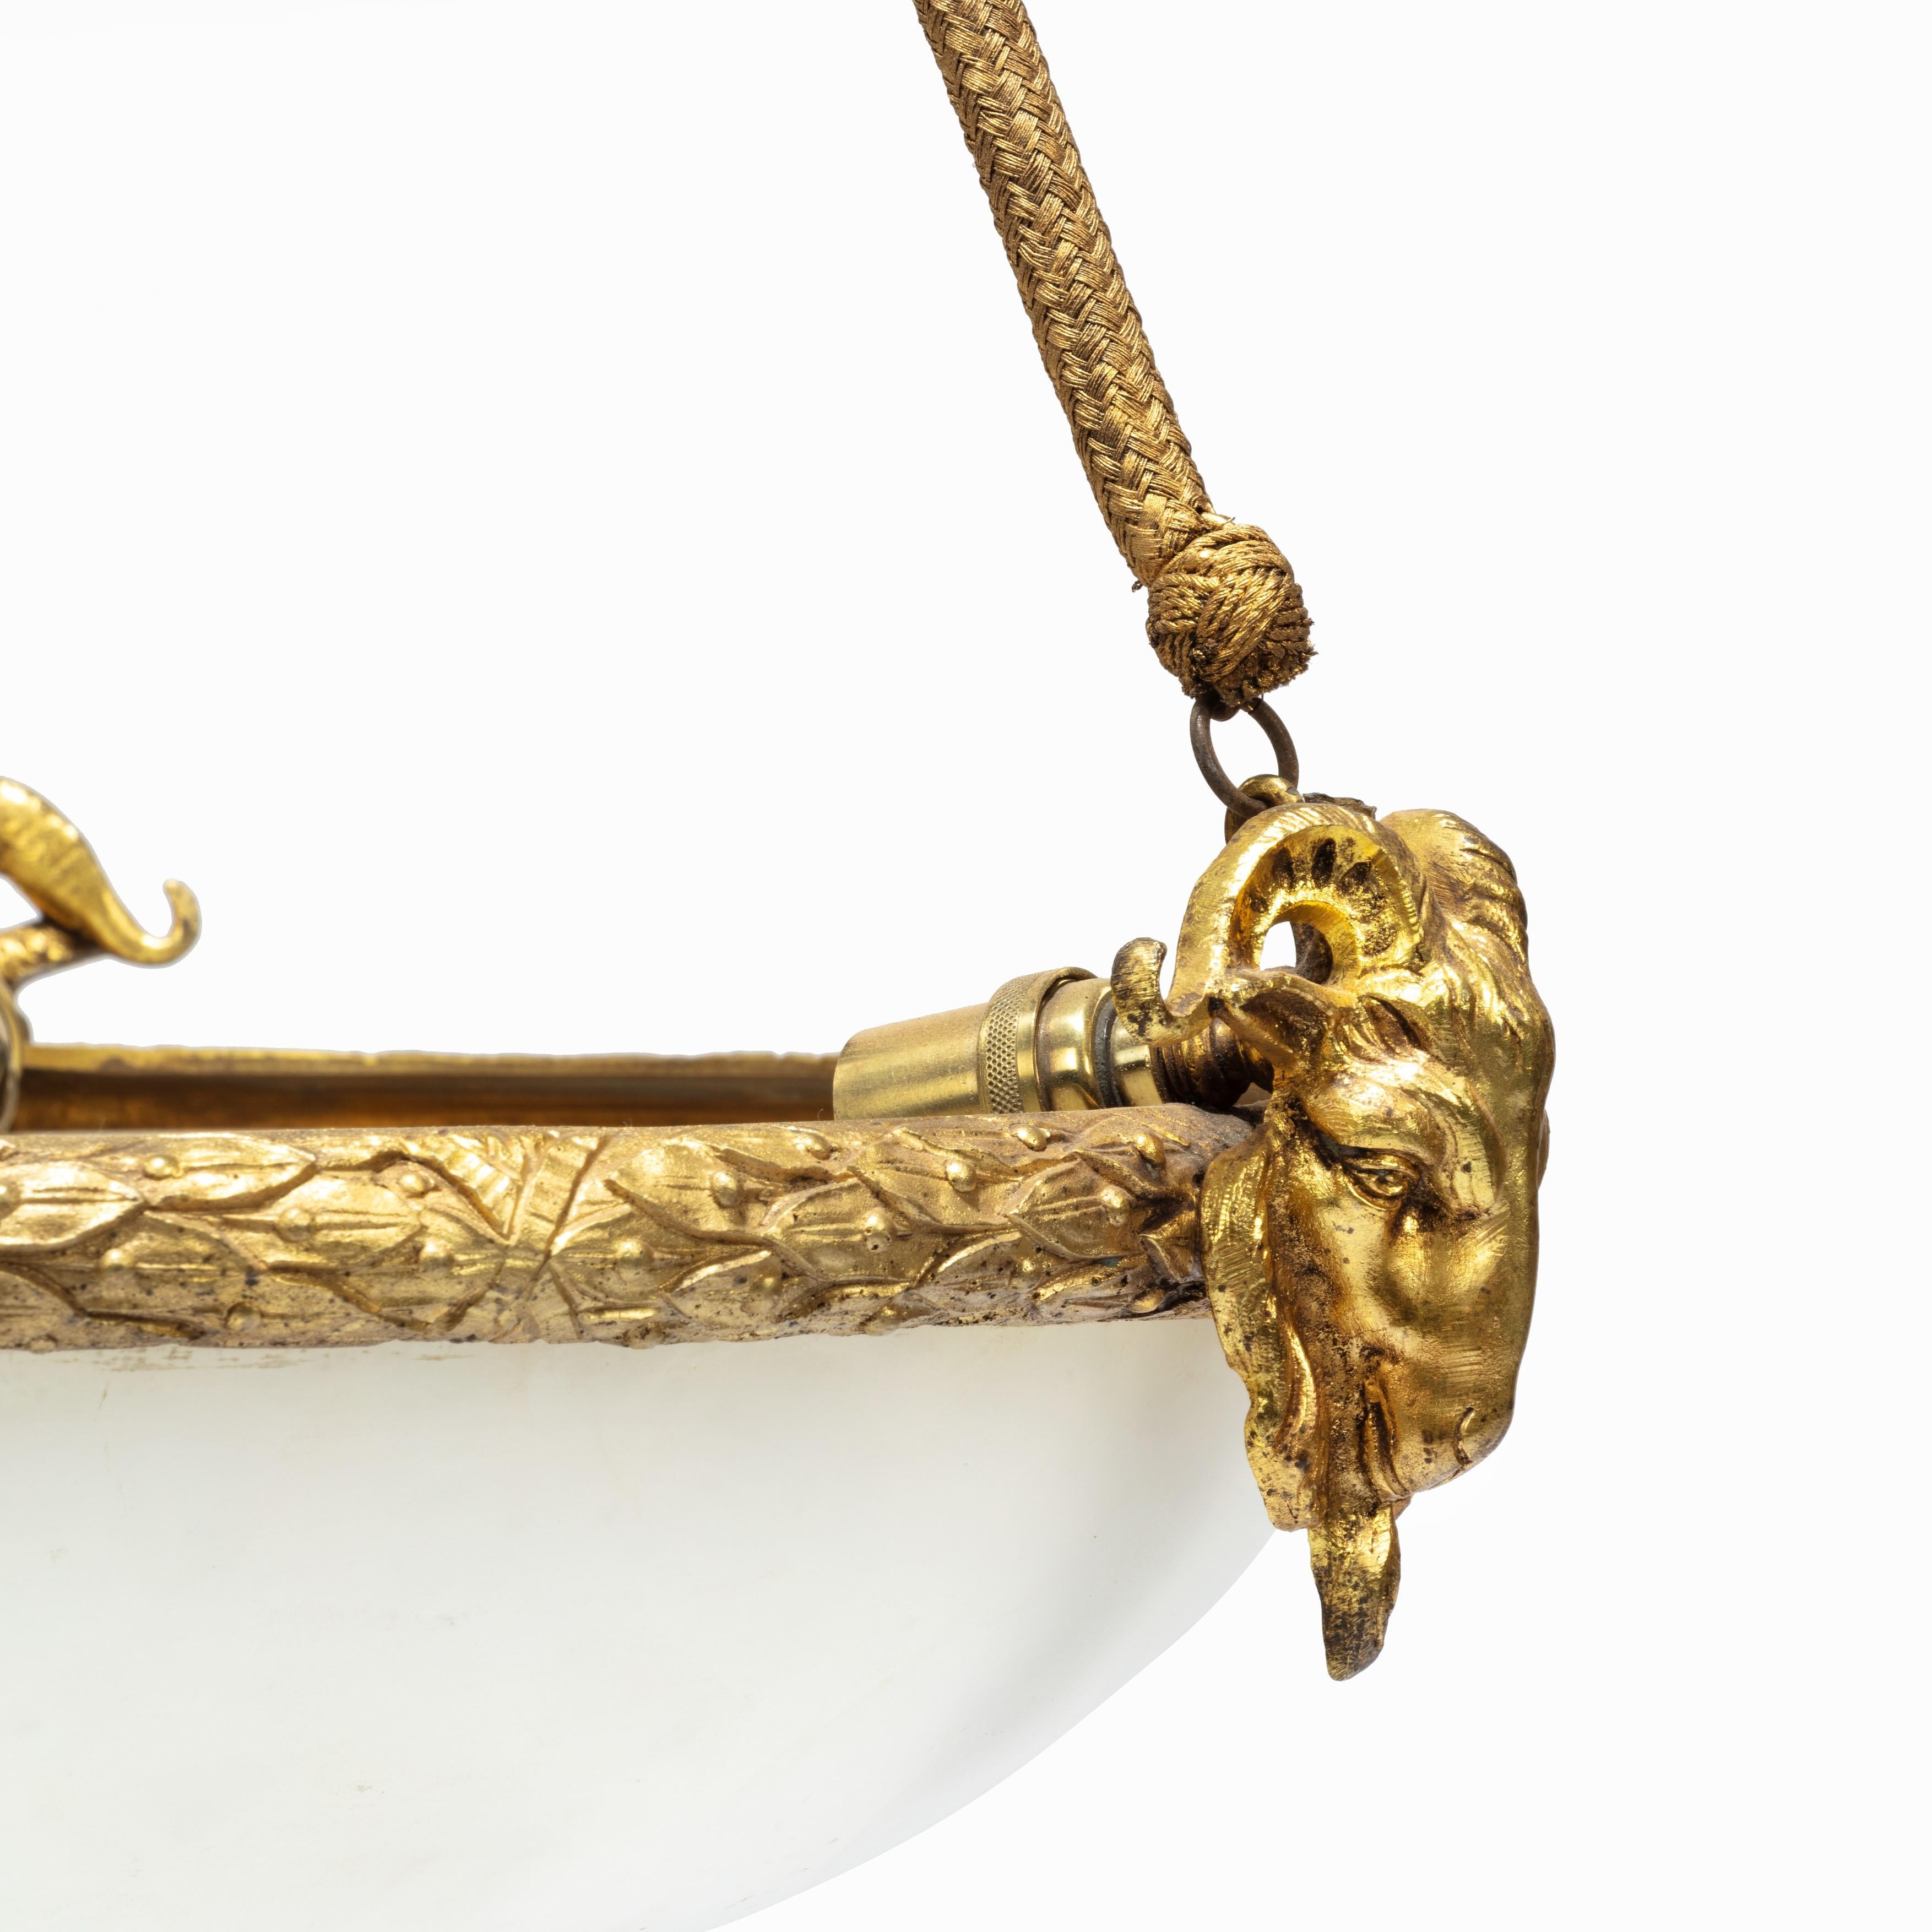 A Napoleon III alabaster hanging lamp, the alabaster bowl held within an ormolu wreath of laurel leaves and three rams head, suspended by three gilt-thread ropes from a tassel and leaf finial, French, circa 1870.
 
Measures: H 34”
W 18” diameter.